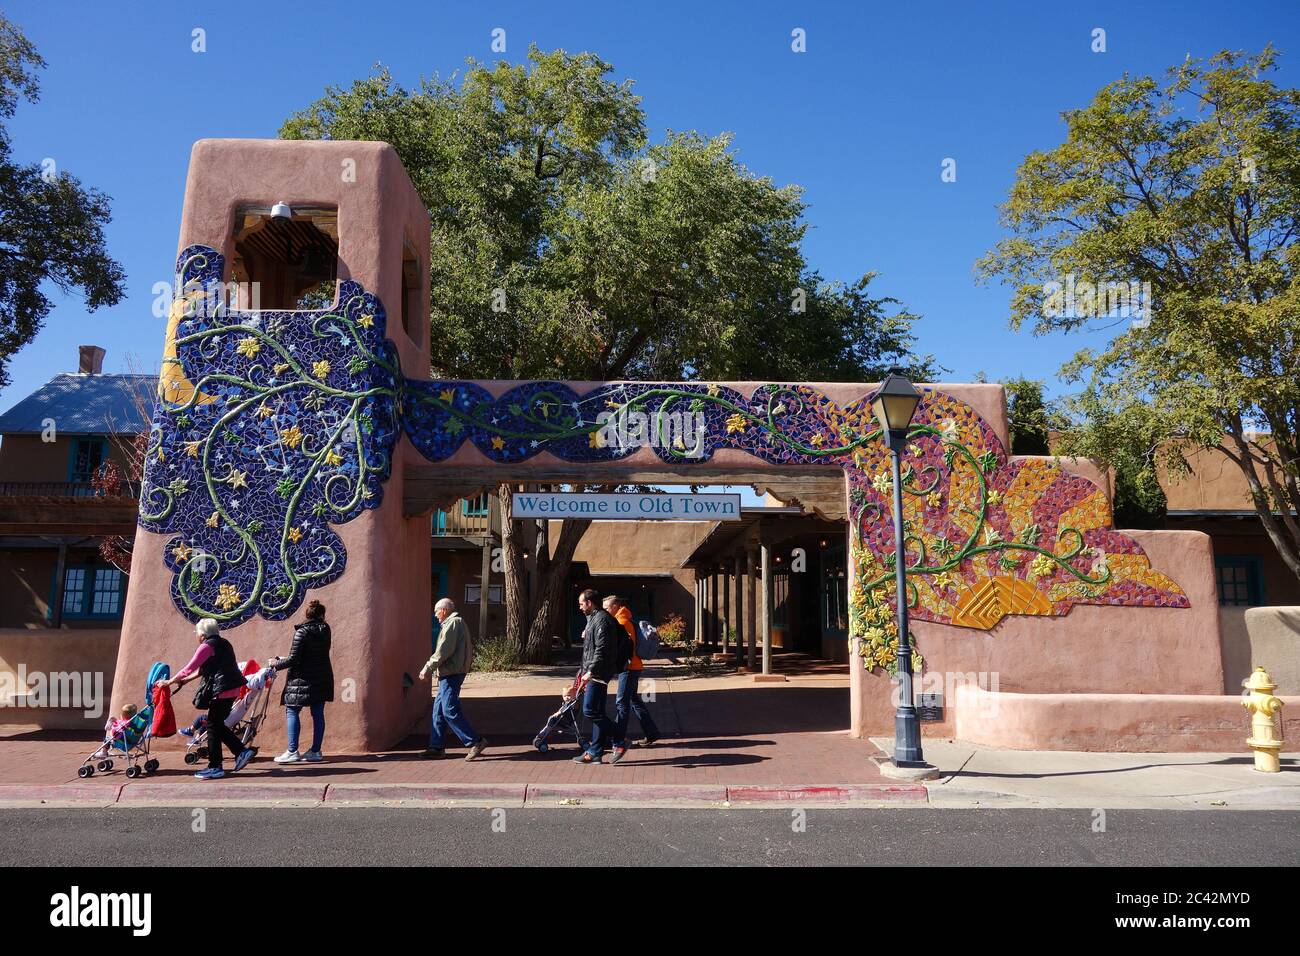 Sign welcoming people to the old town in Albuquerque, NM Stock Photo